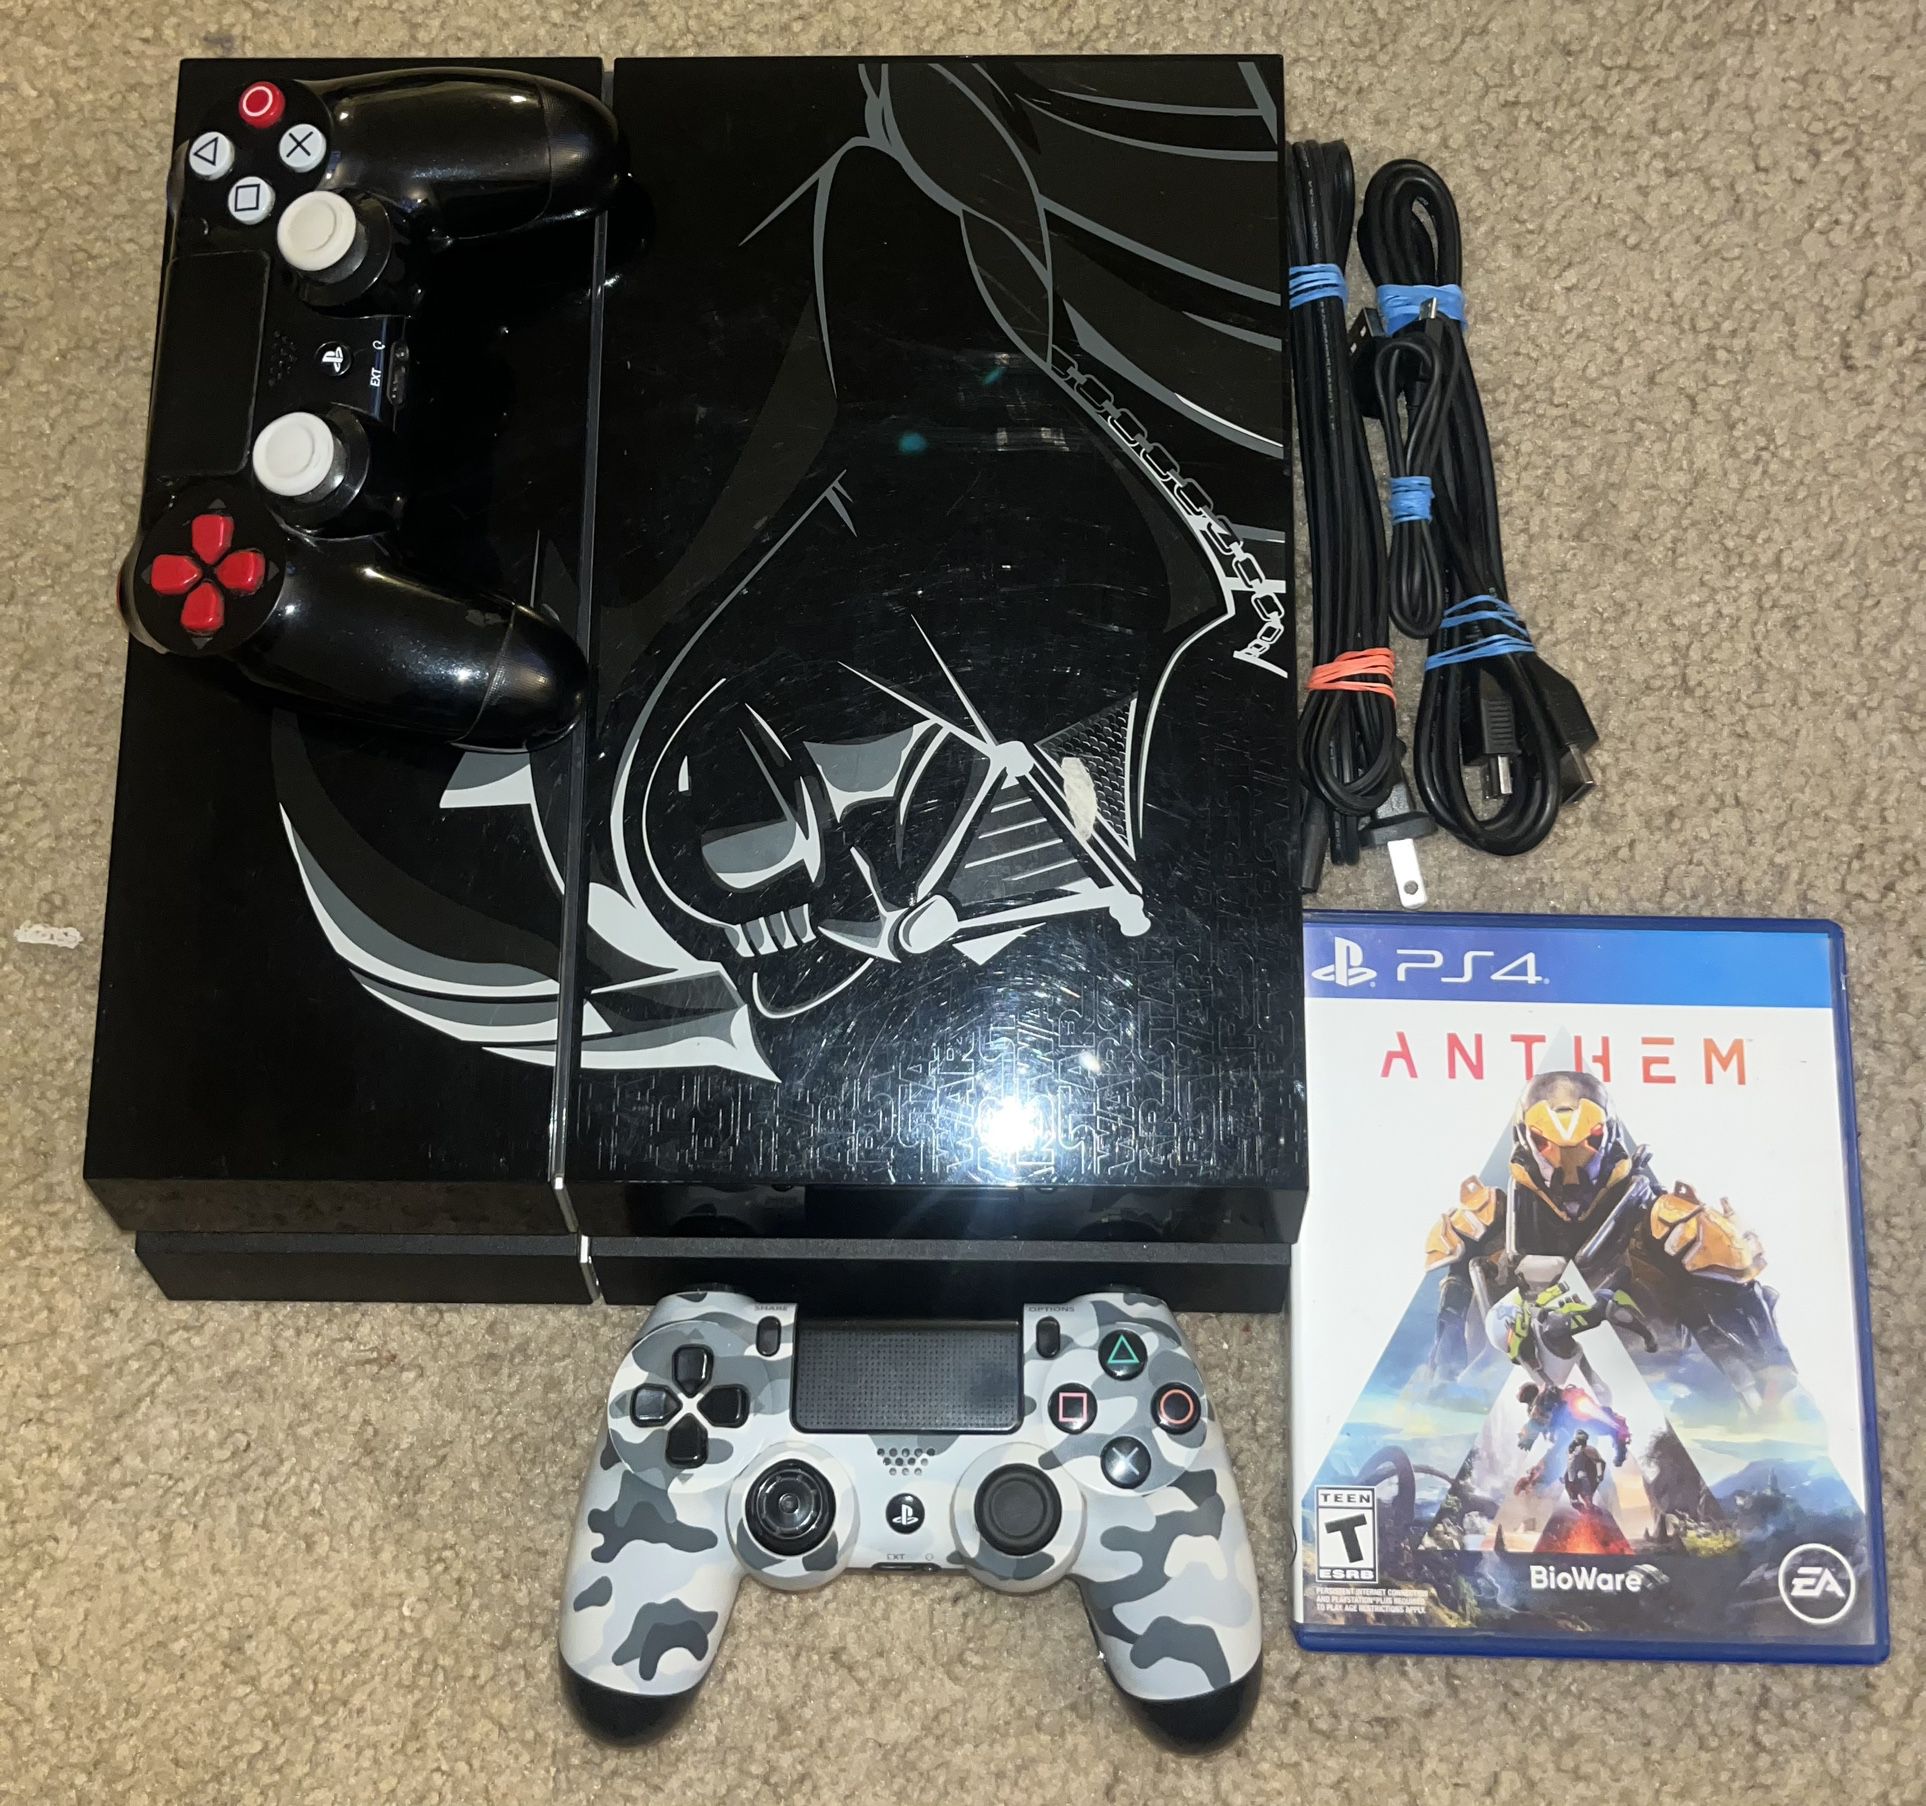 PS4 Darth Special Edition for Sale in Alhambra, CA - OfferUp